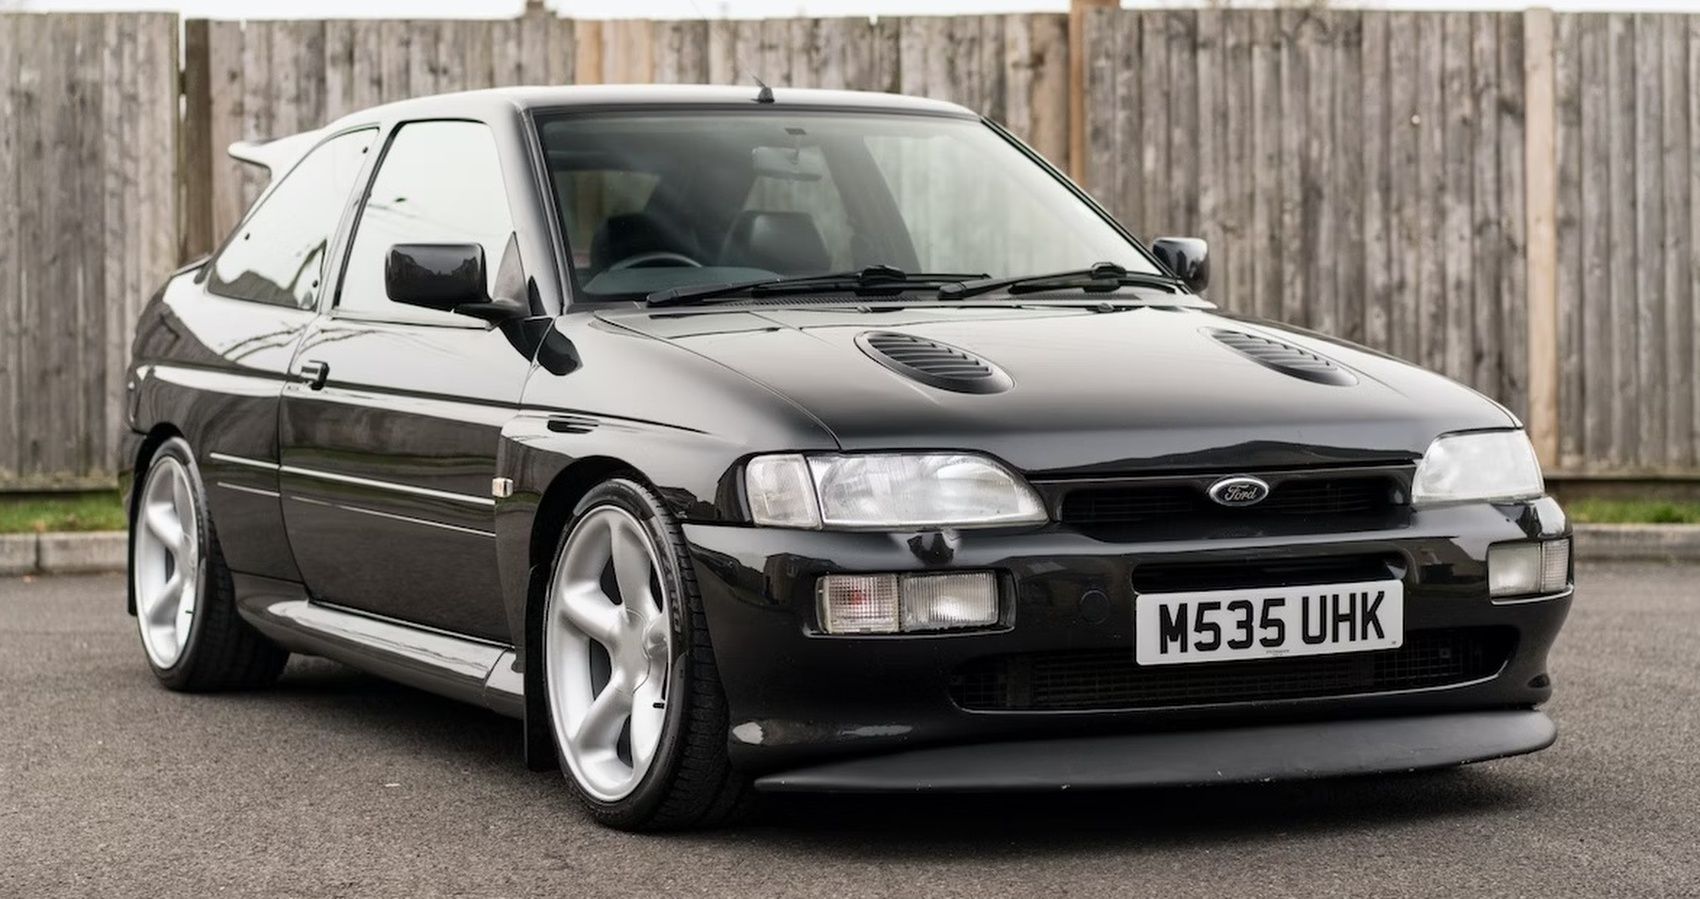 1994 Ford Escort RS Cosworth FEATURED IMAGE Cropped